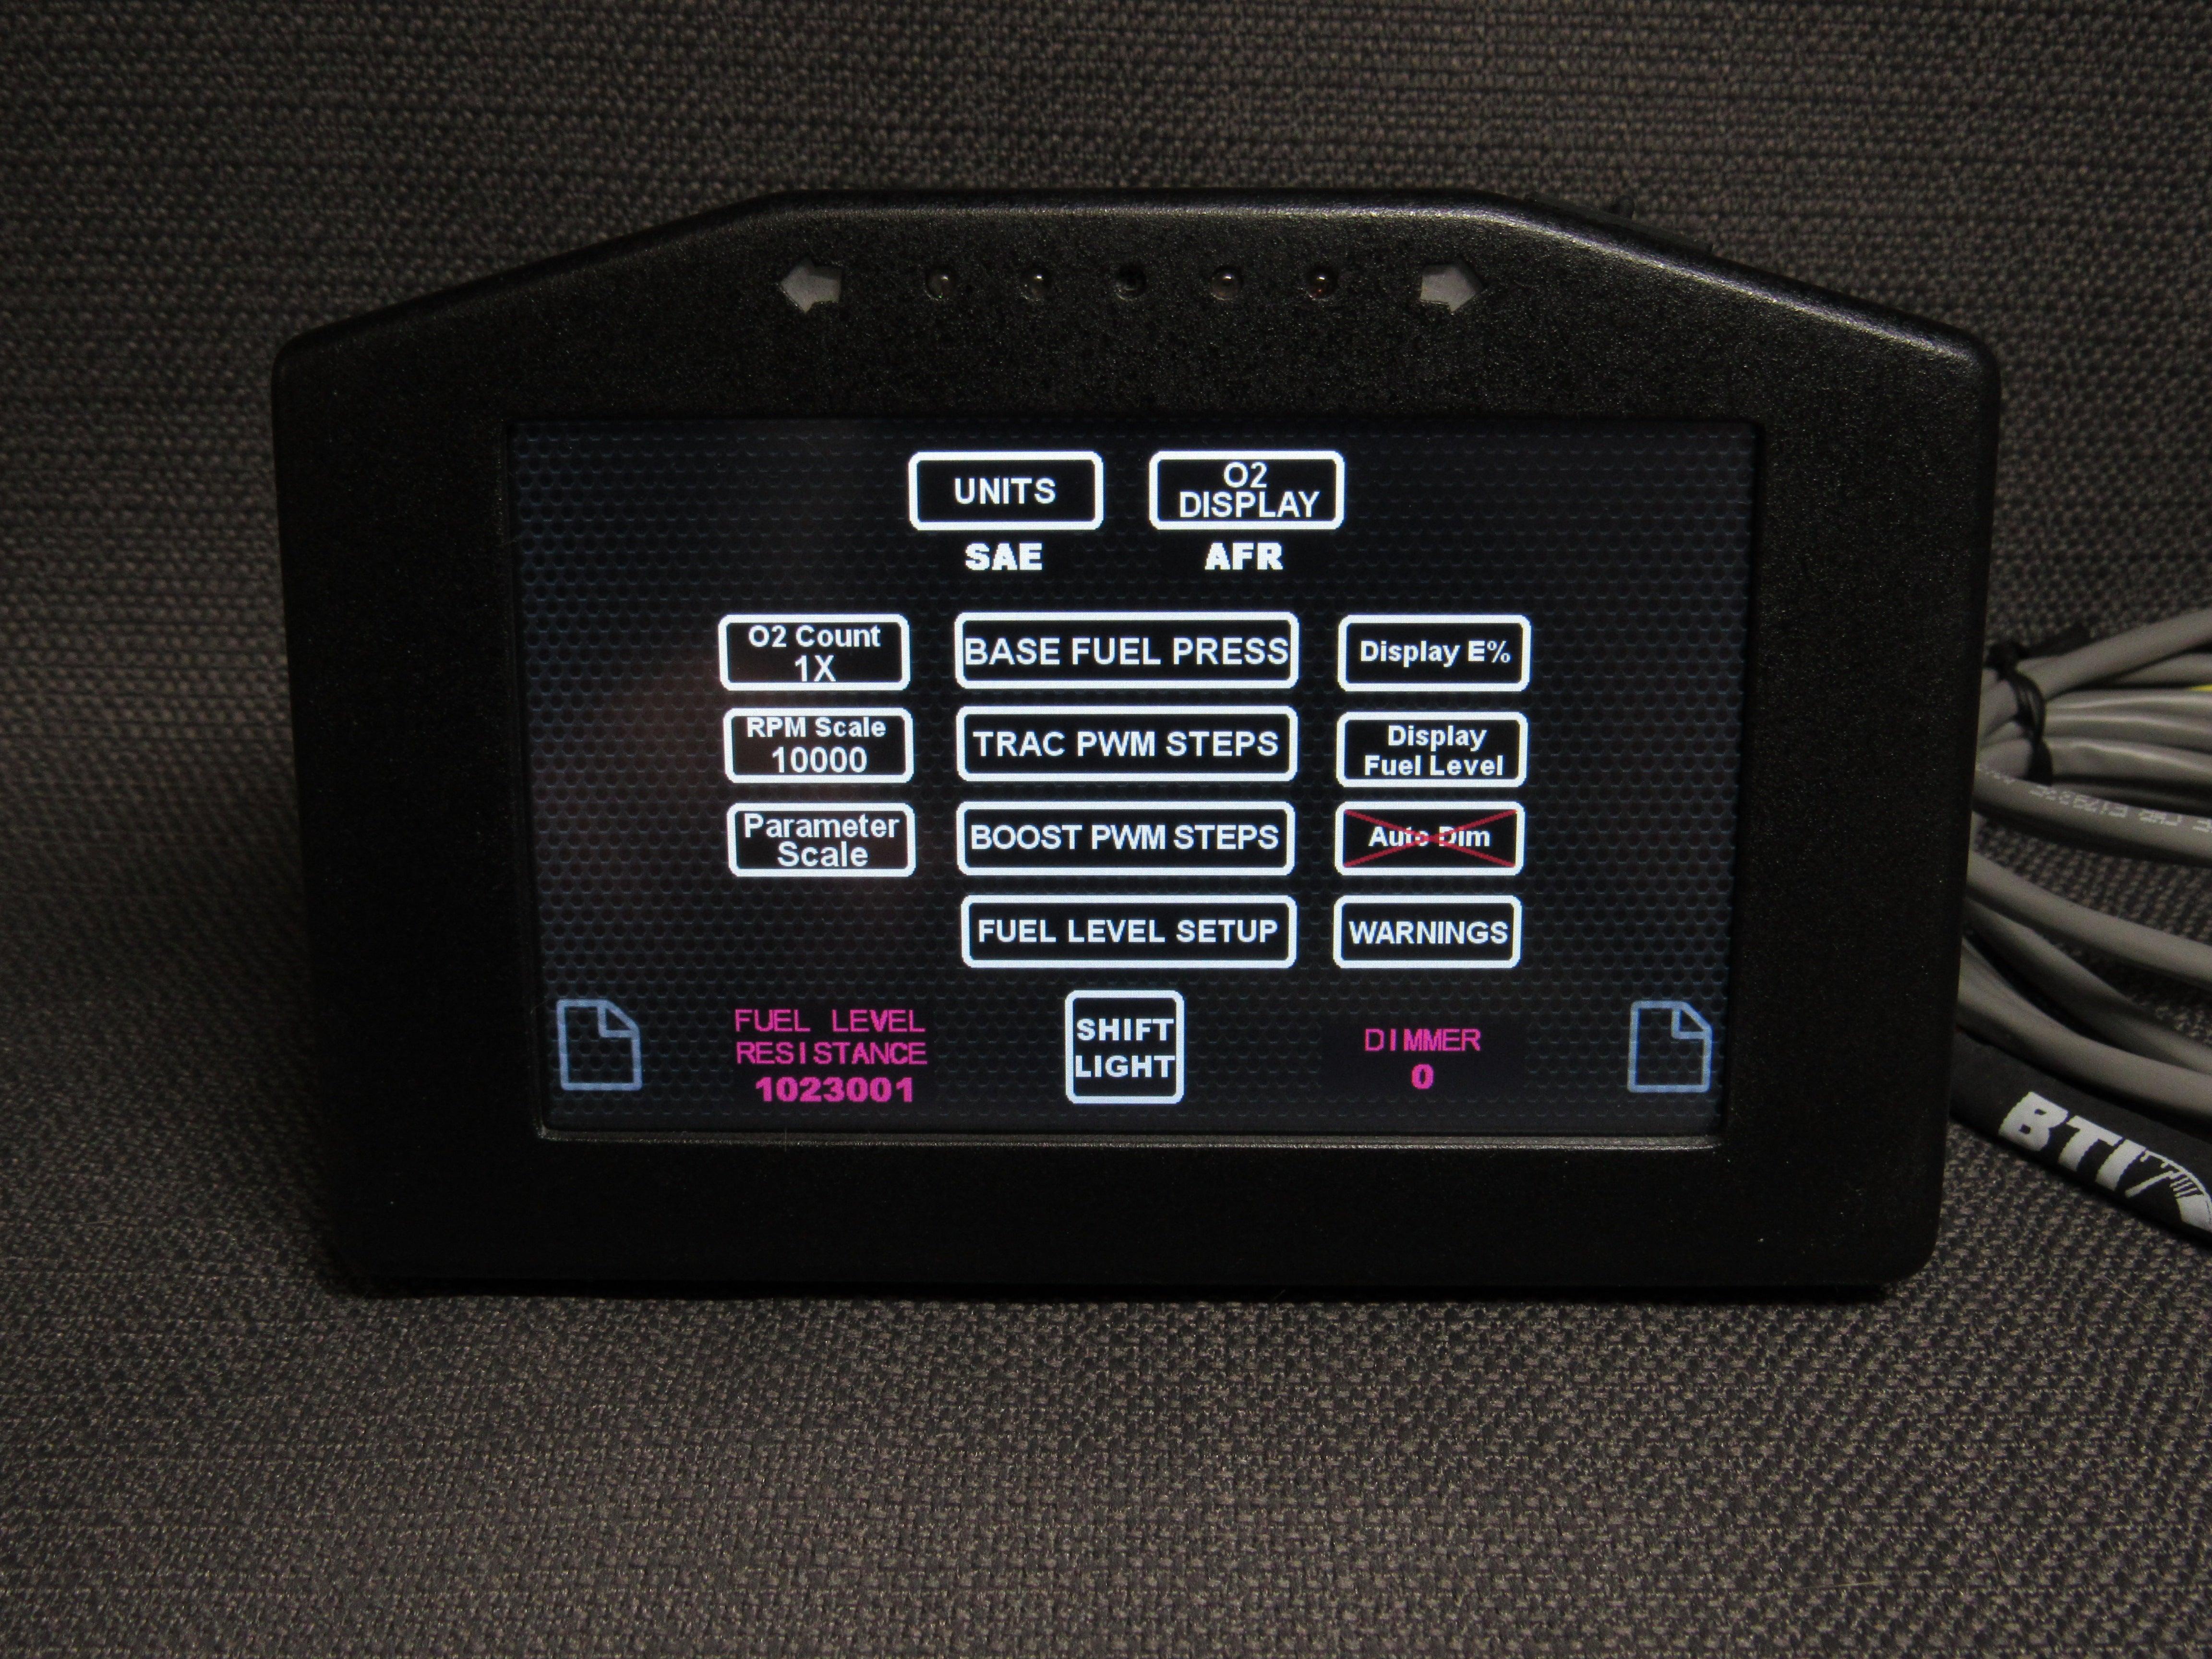 BTI 5" Dash Touch Screen Display from Tuned By Shawn